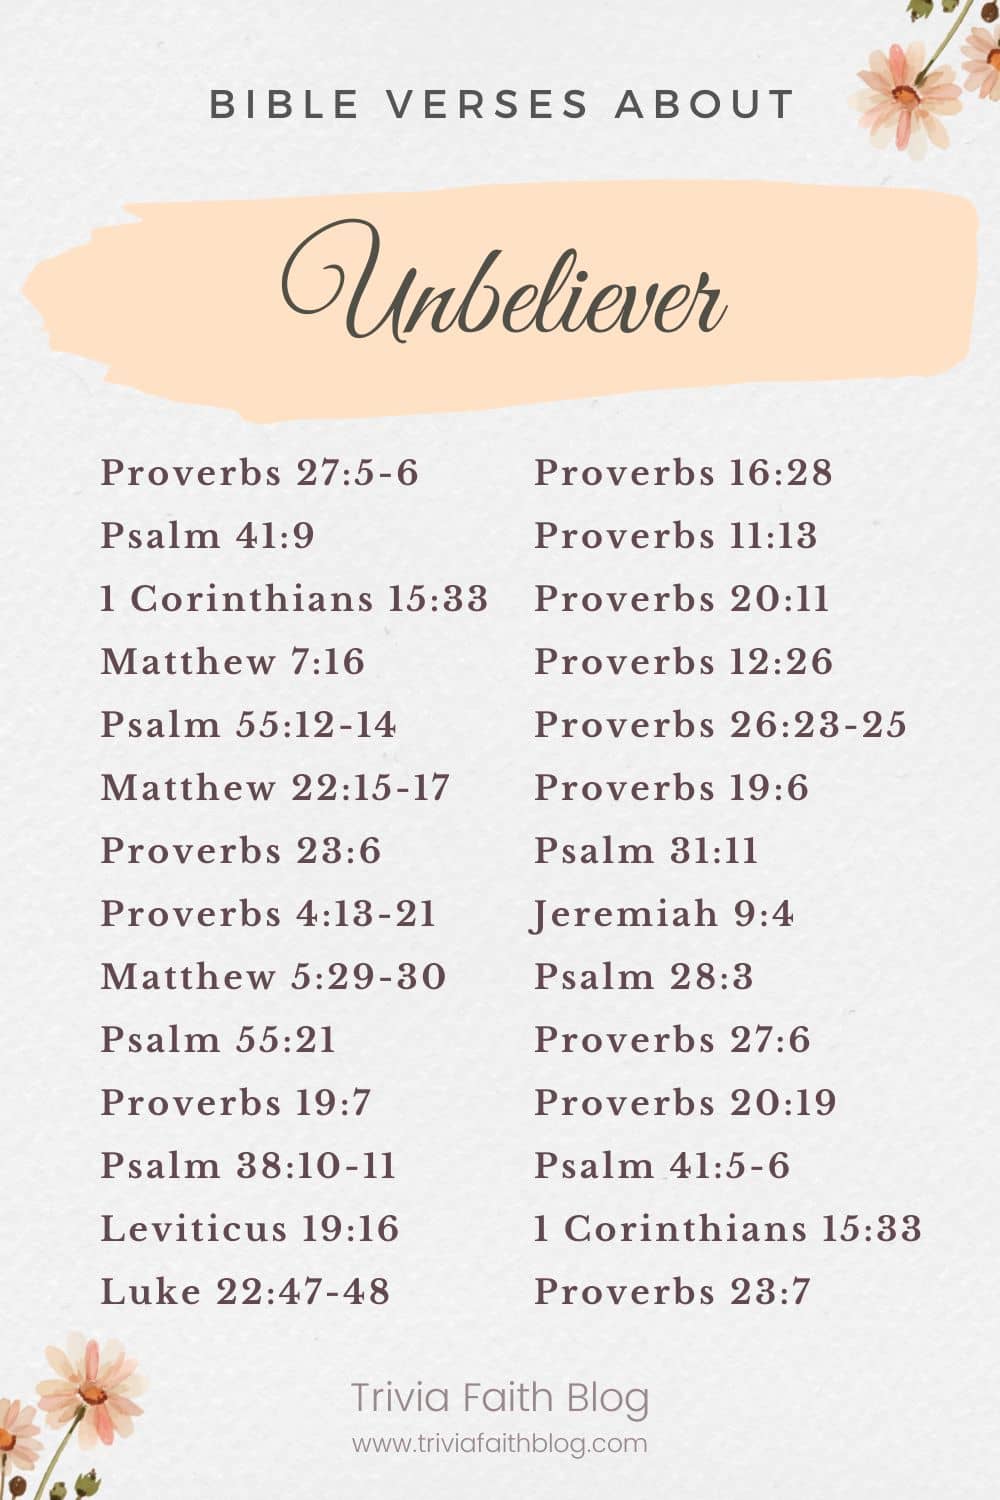 Bible verses about Unbelievers